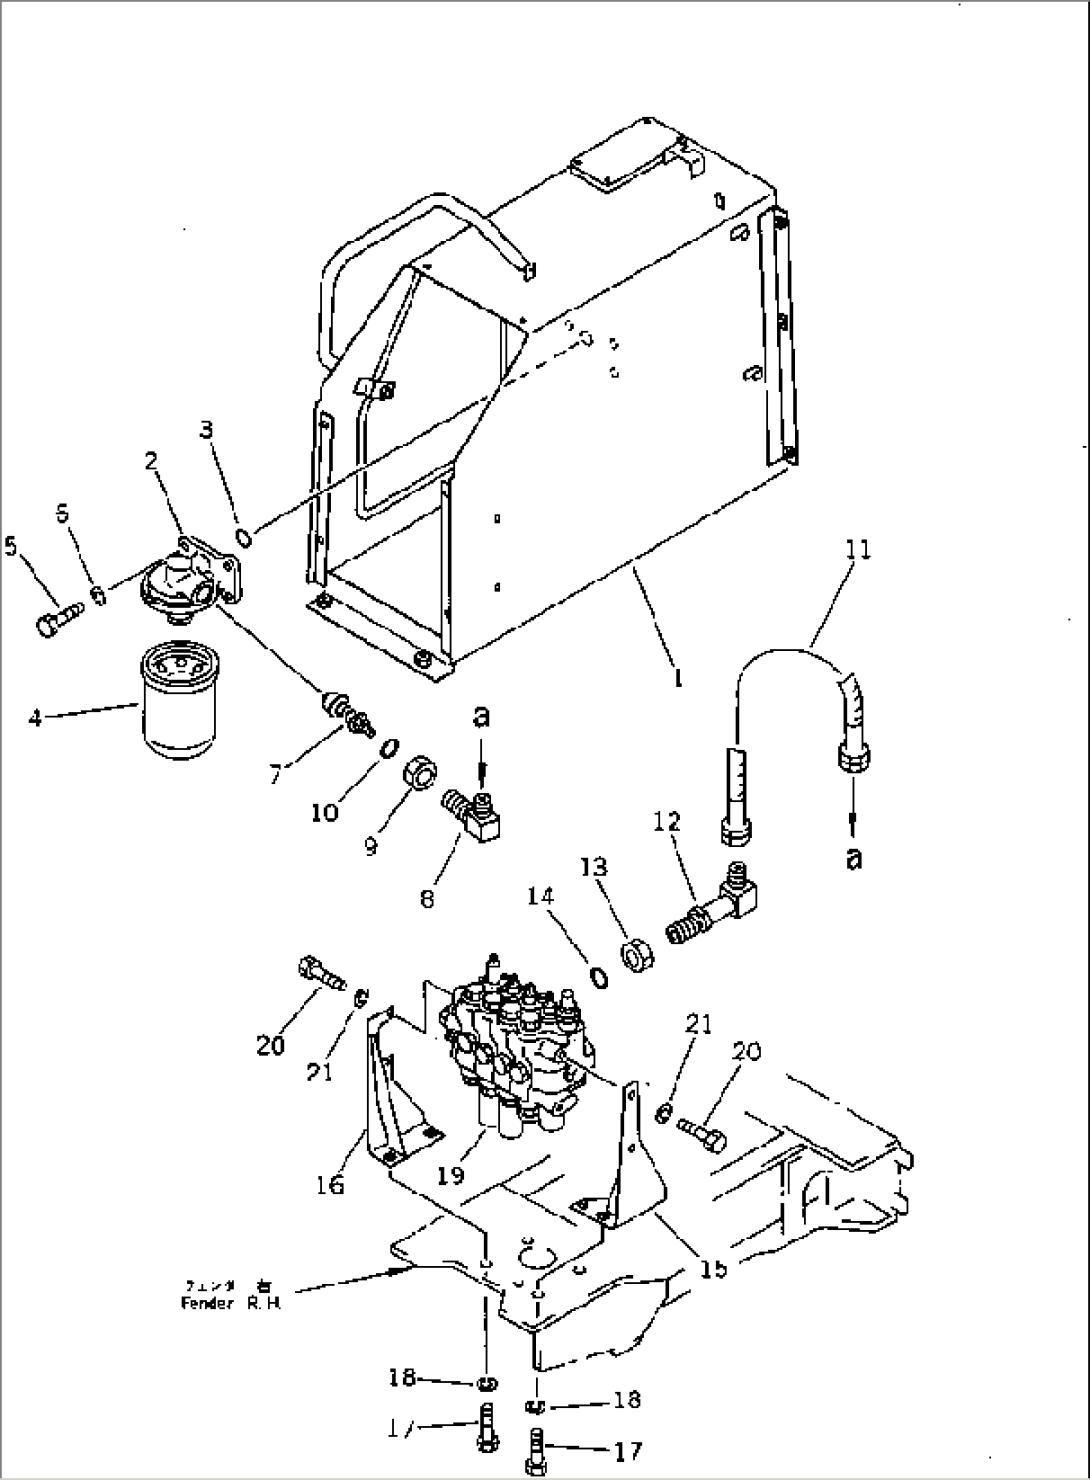 HYDRAULIC TANK AND FILTER (FOR 3-POINT HITCH AND RIPPER)